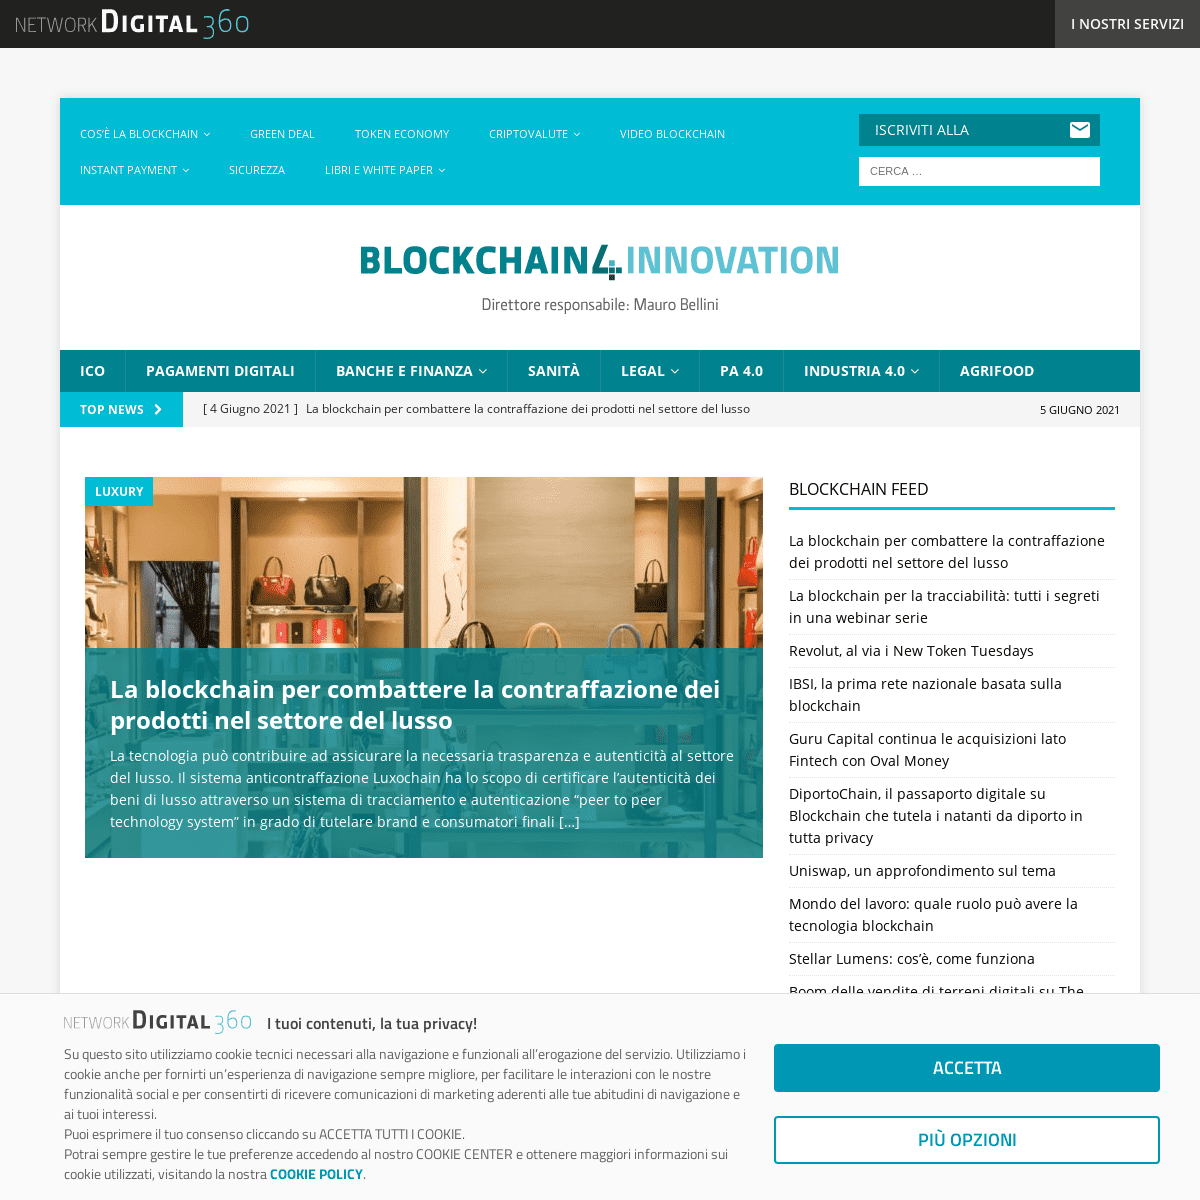 A complete backup of https://blockchain4innovation.it